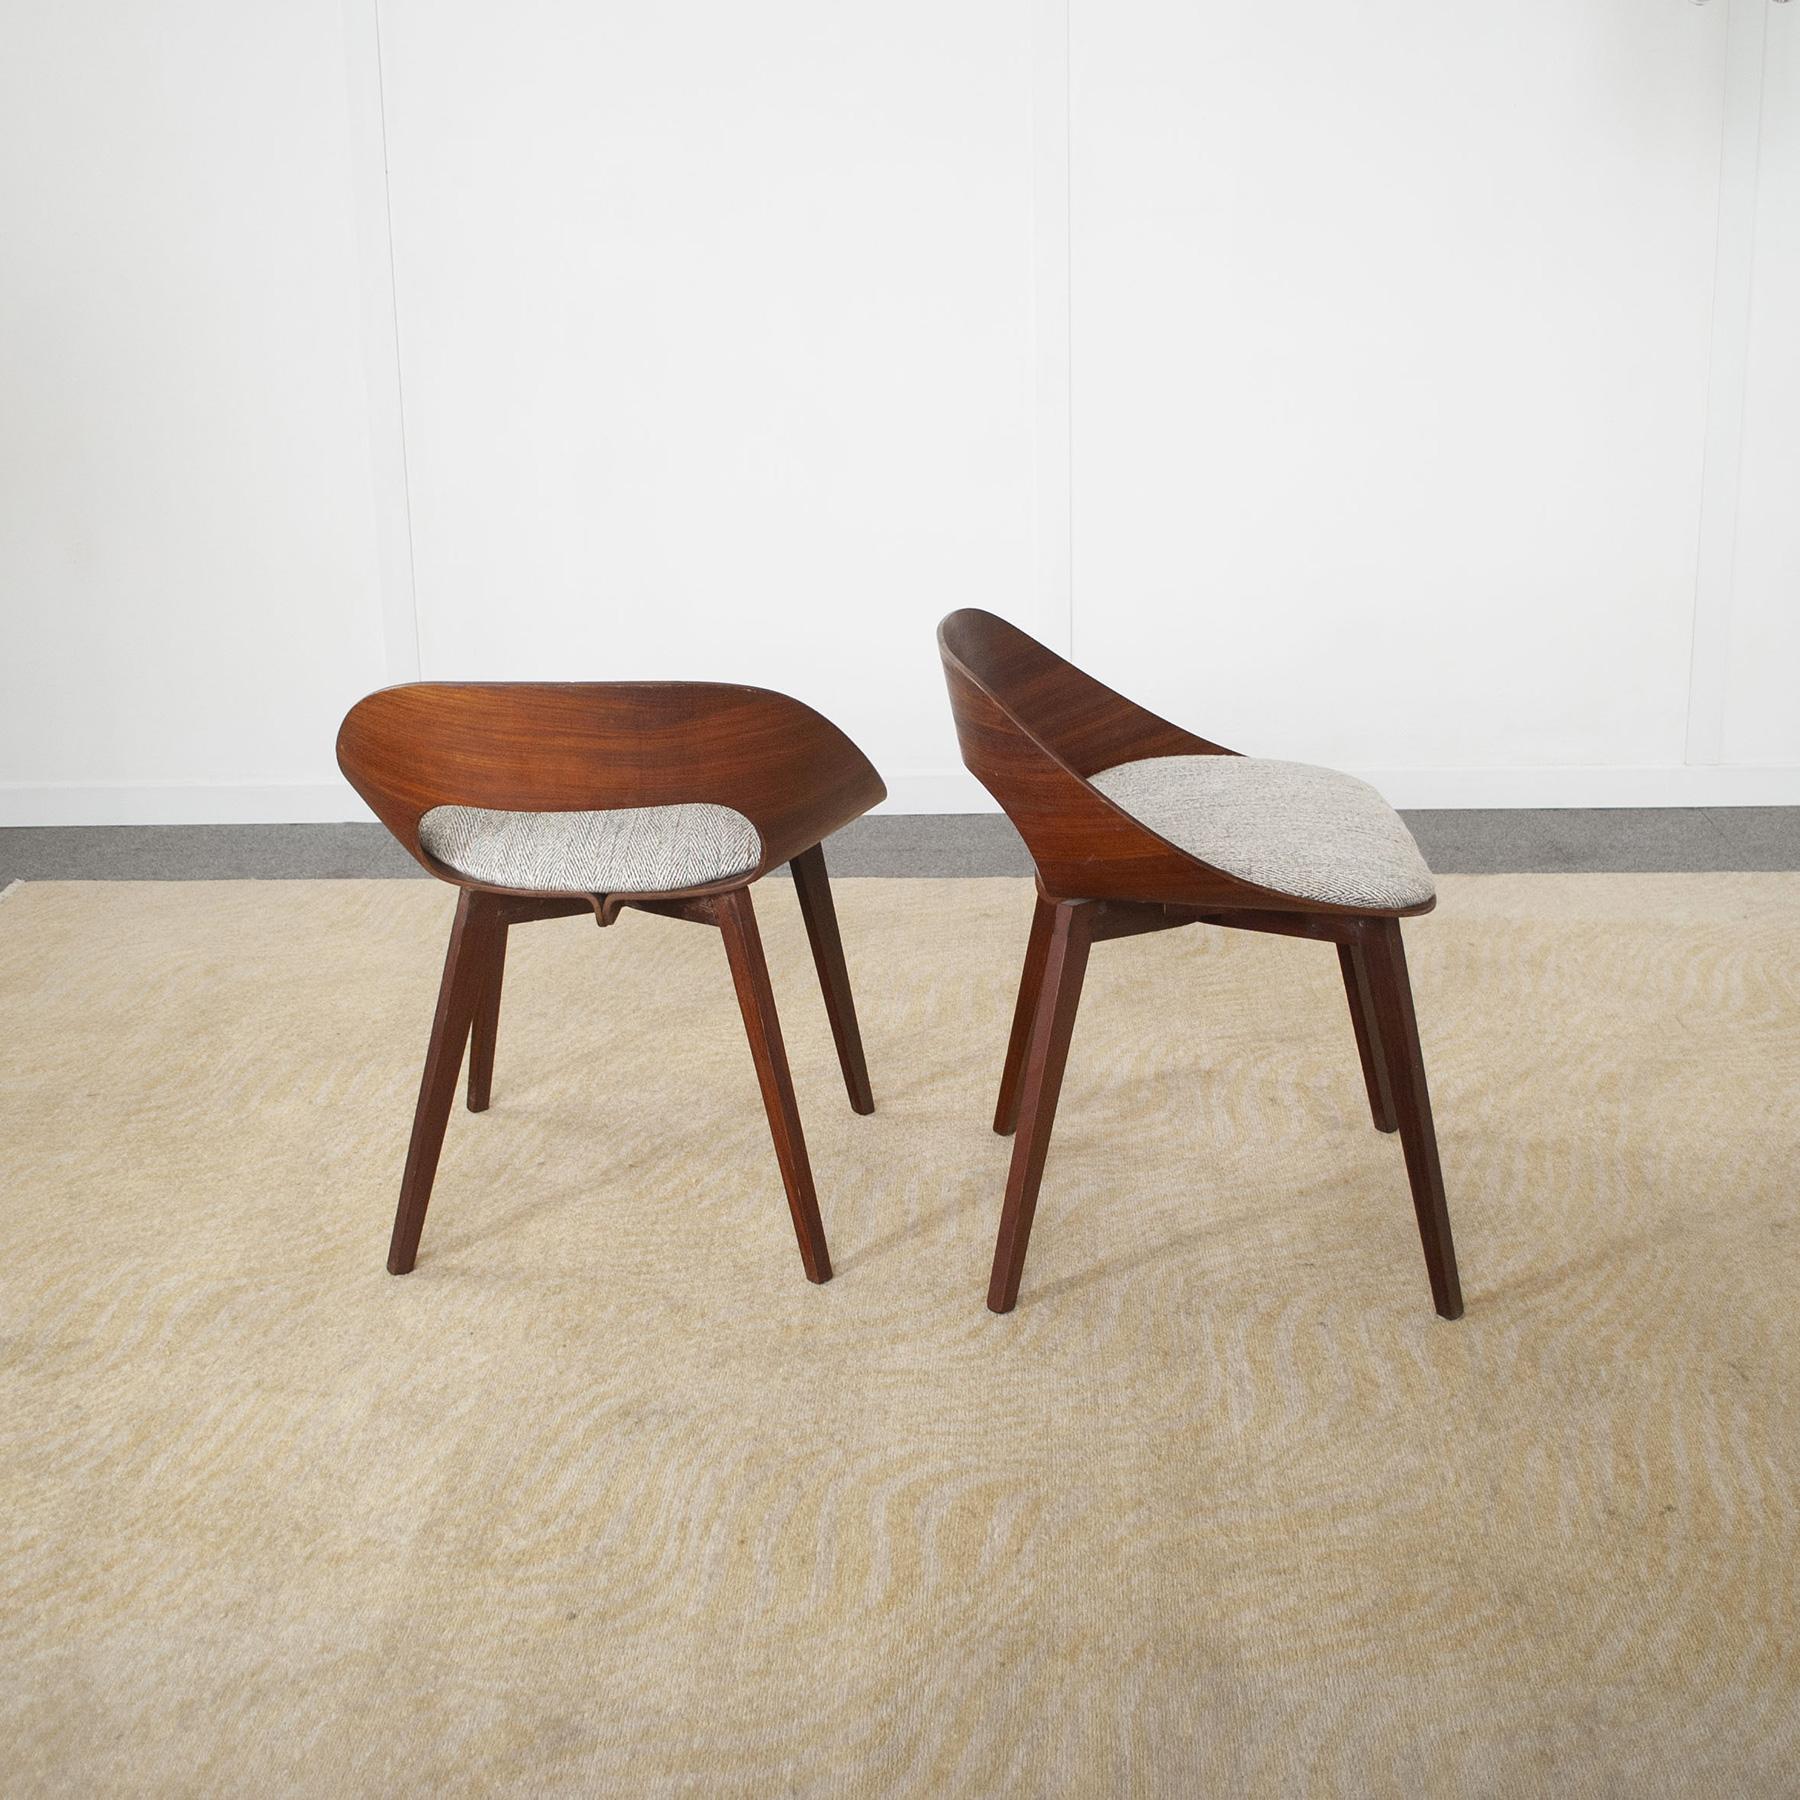 Mid-20th Century Eero saarinen in the style set of two chairs mid fifties